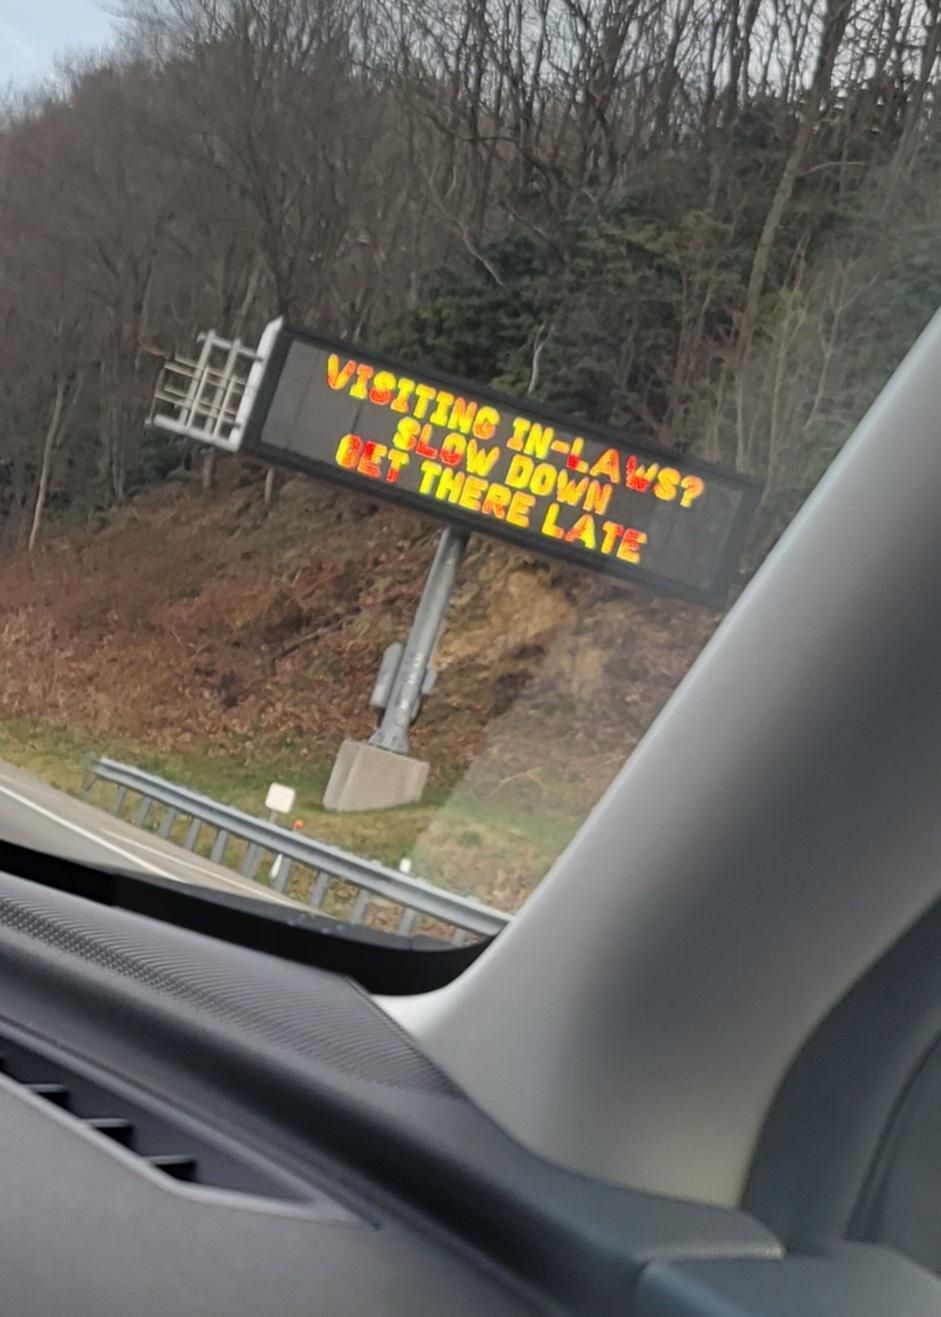 This traffic sign in Virginia with a sense of humor.